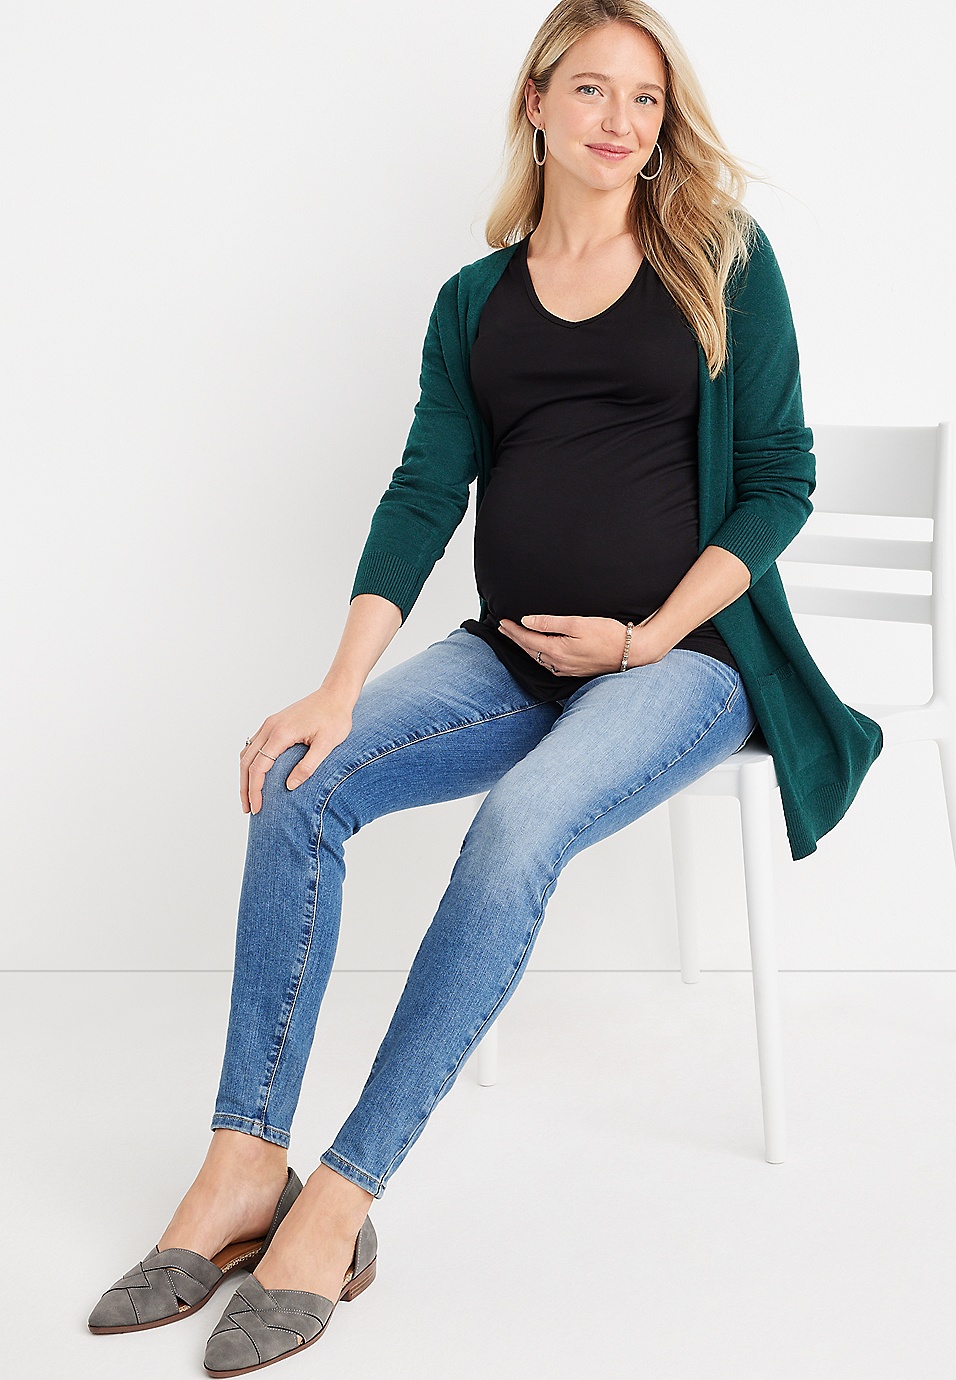 m jeans by maurices™ Everflex™ Super Skinny Side Panel Maternity Jean